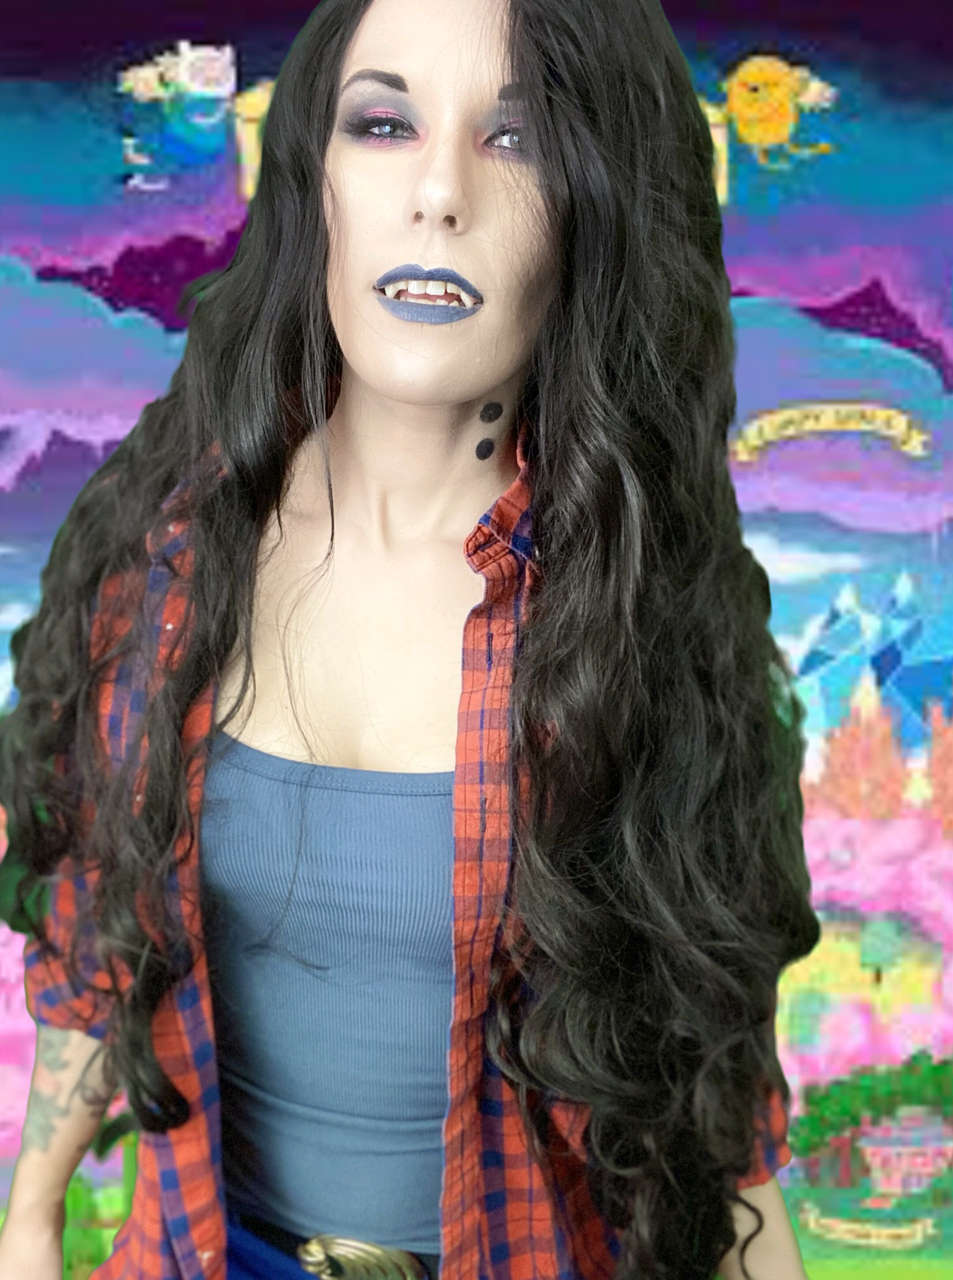 Marceline The Vampire Queen From Adventure Time Done By Harlequin Barbie Sel